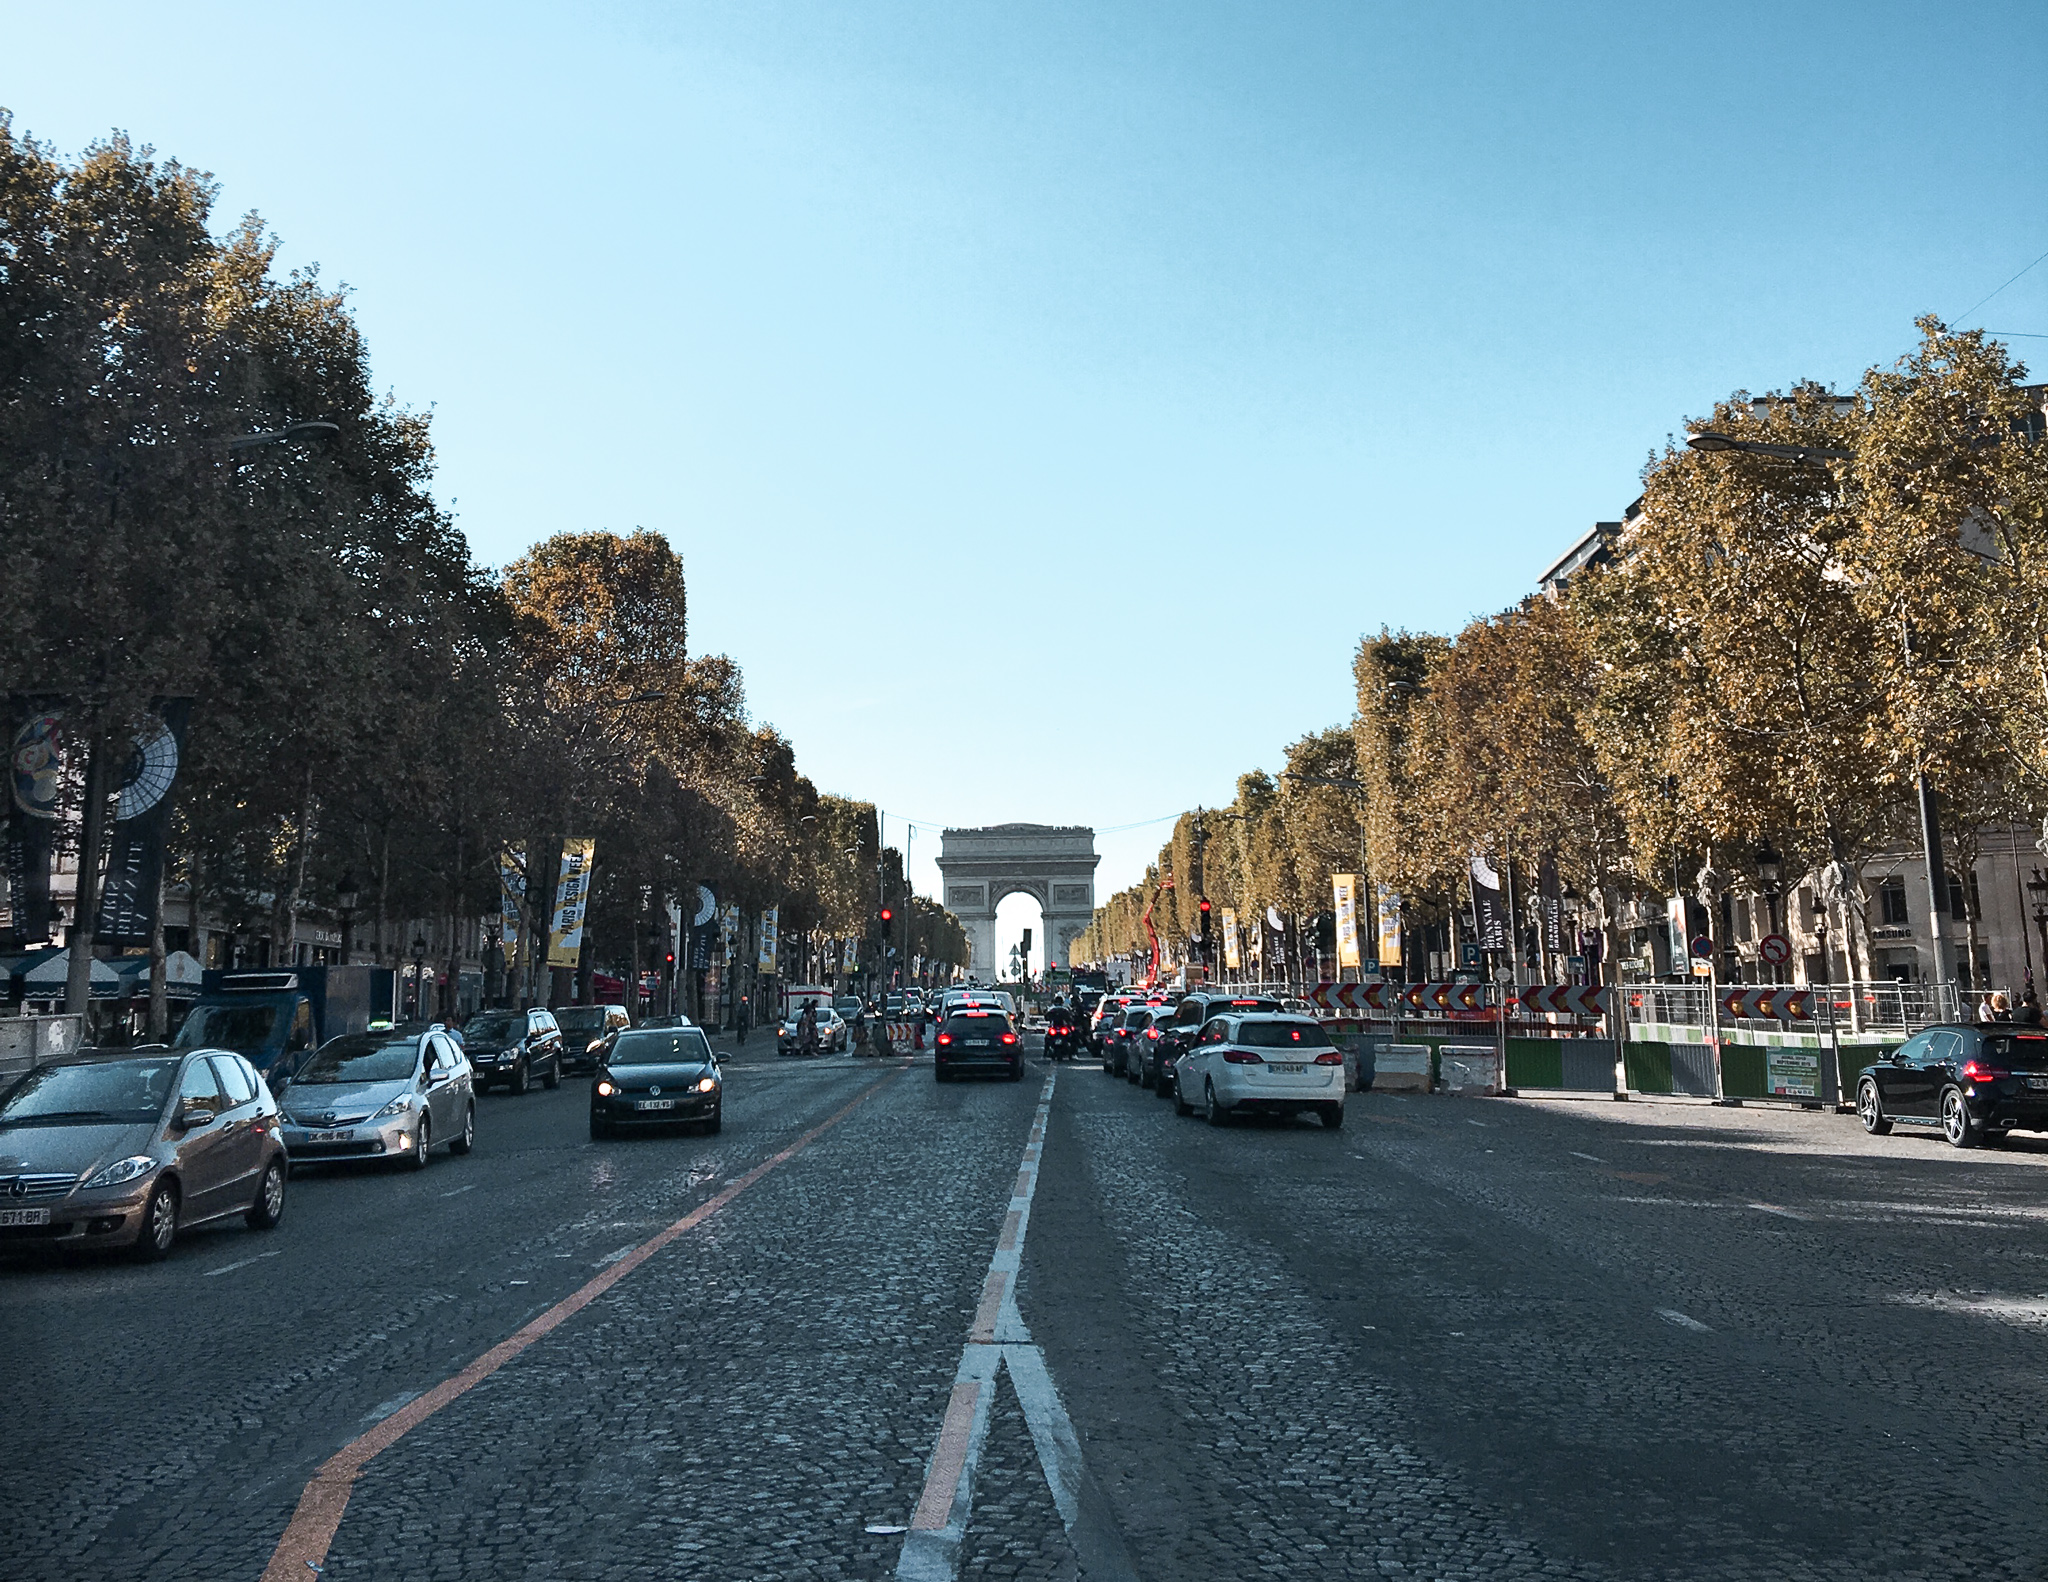 View of the Champs elysees in Paris, France